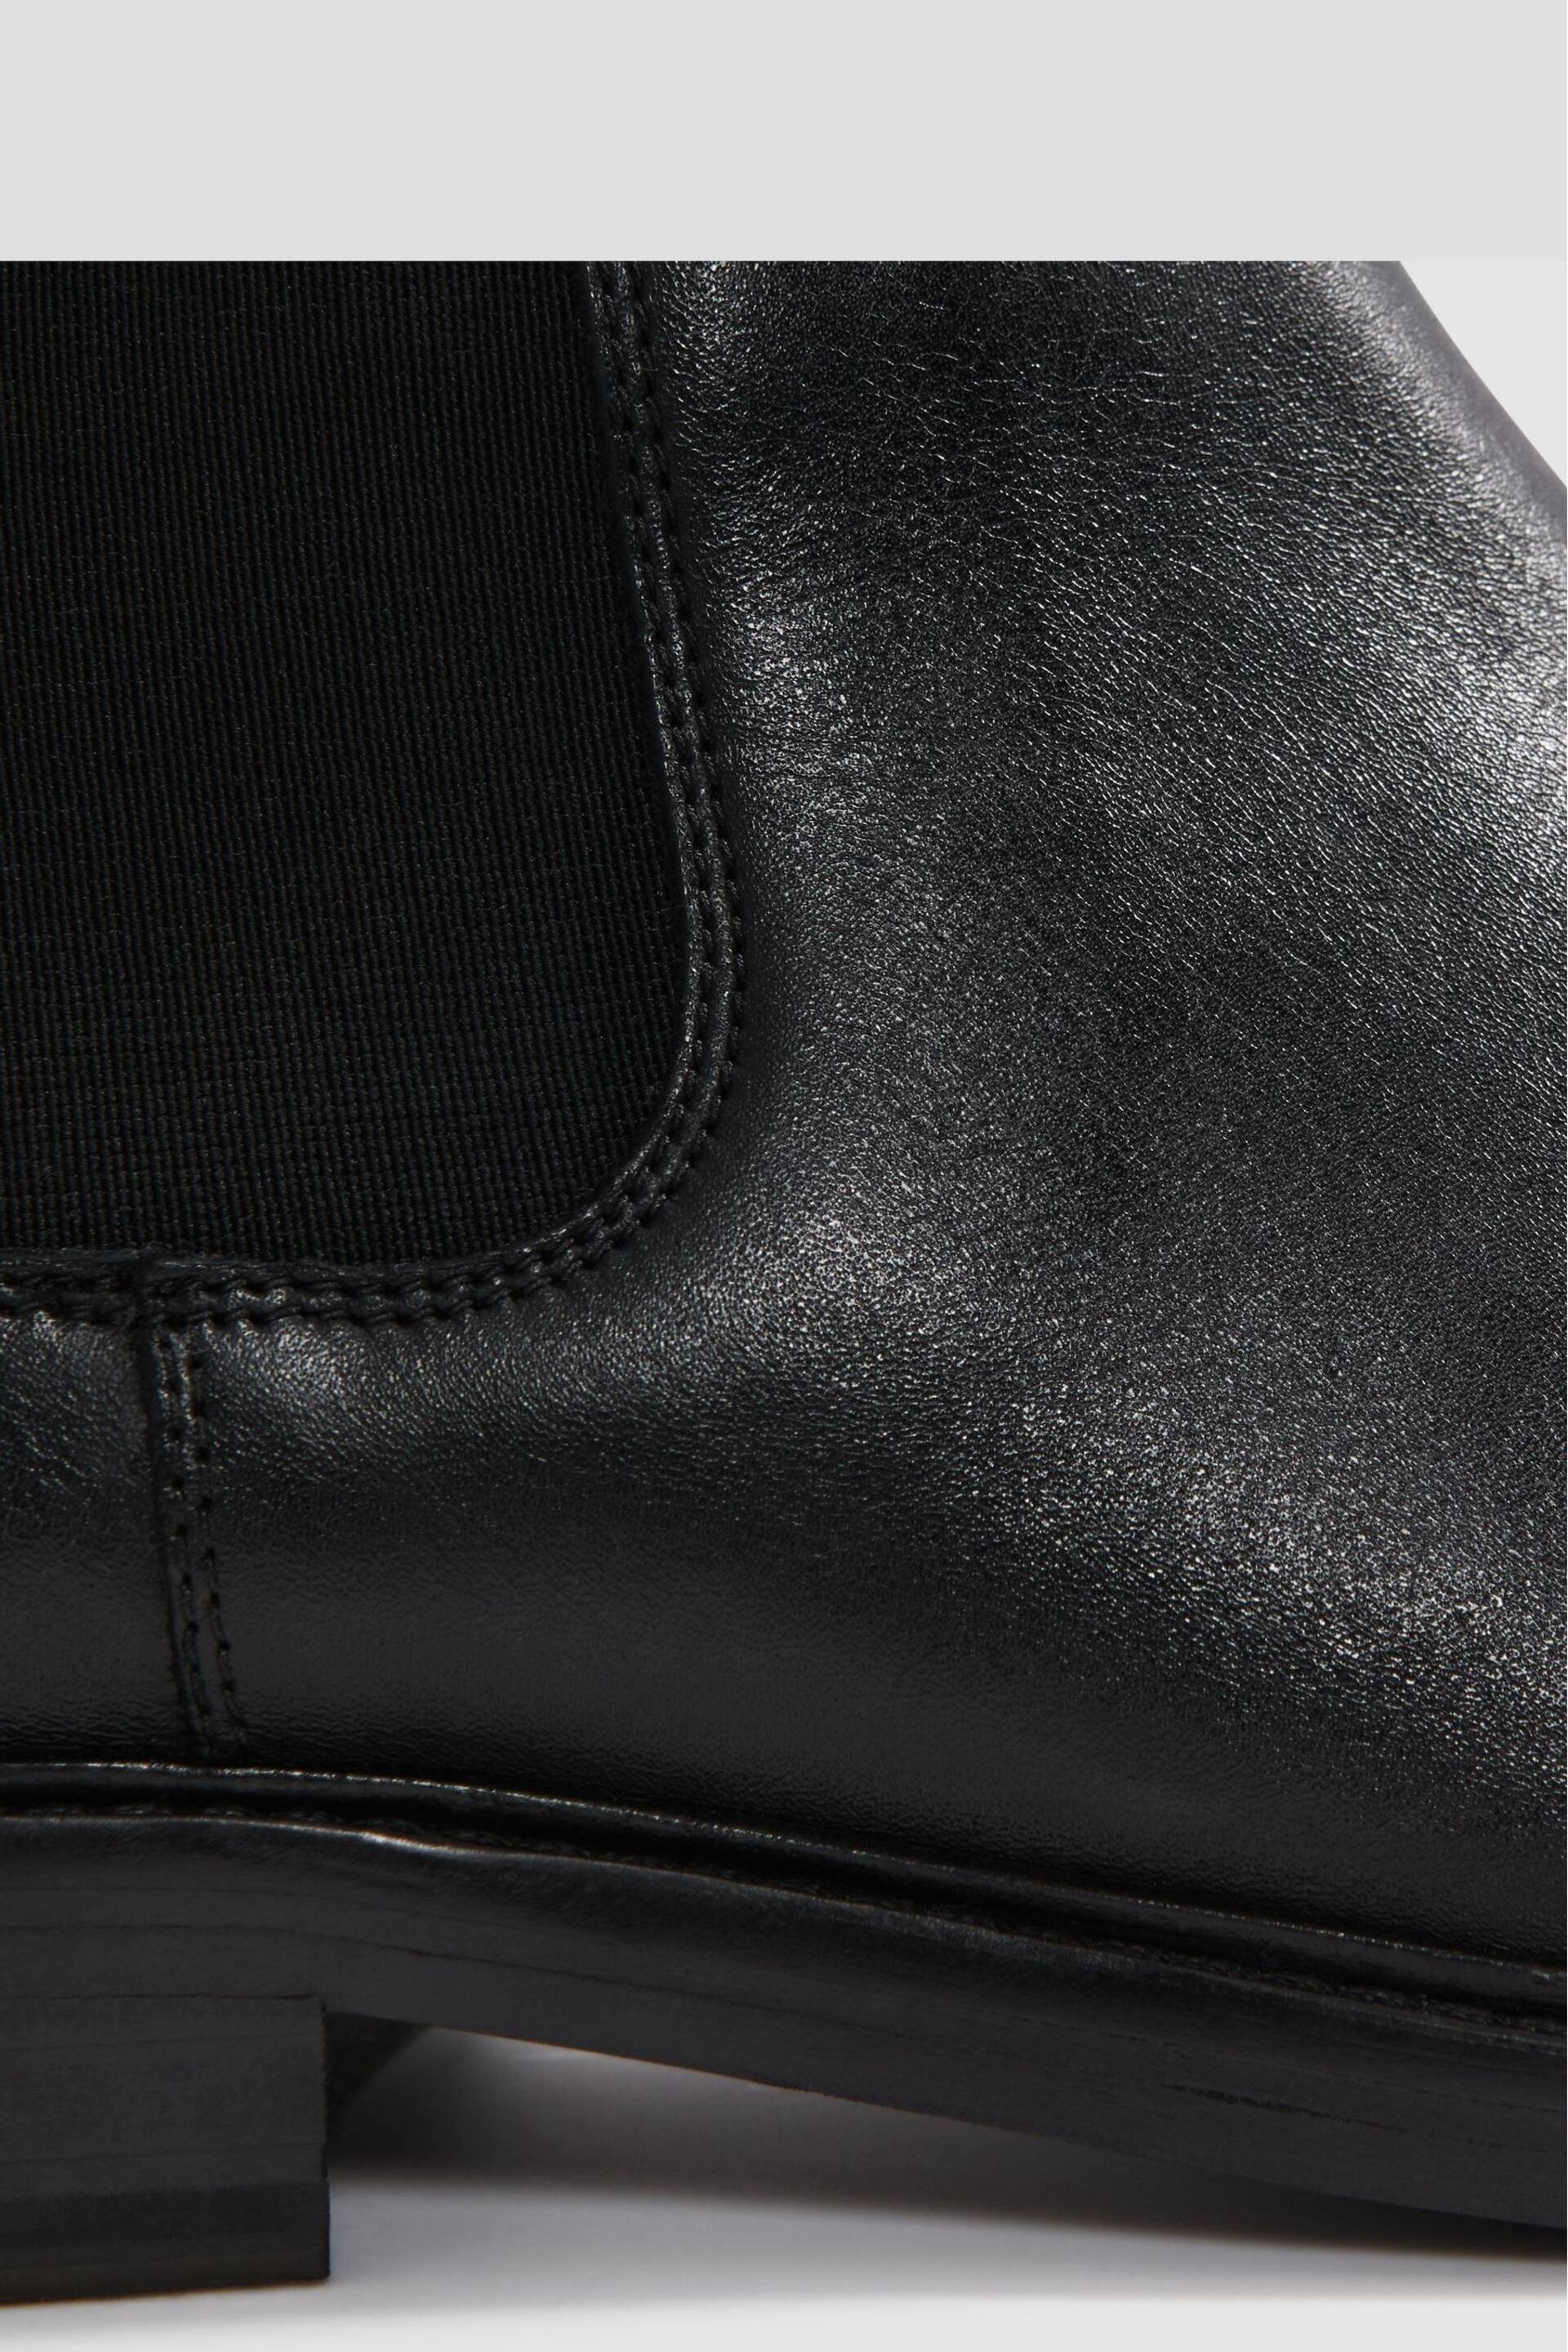 Reiss Black Renor Leather Chelsea Boots - Image 5 of 6